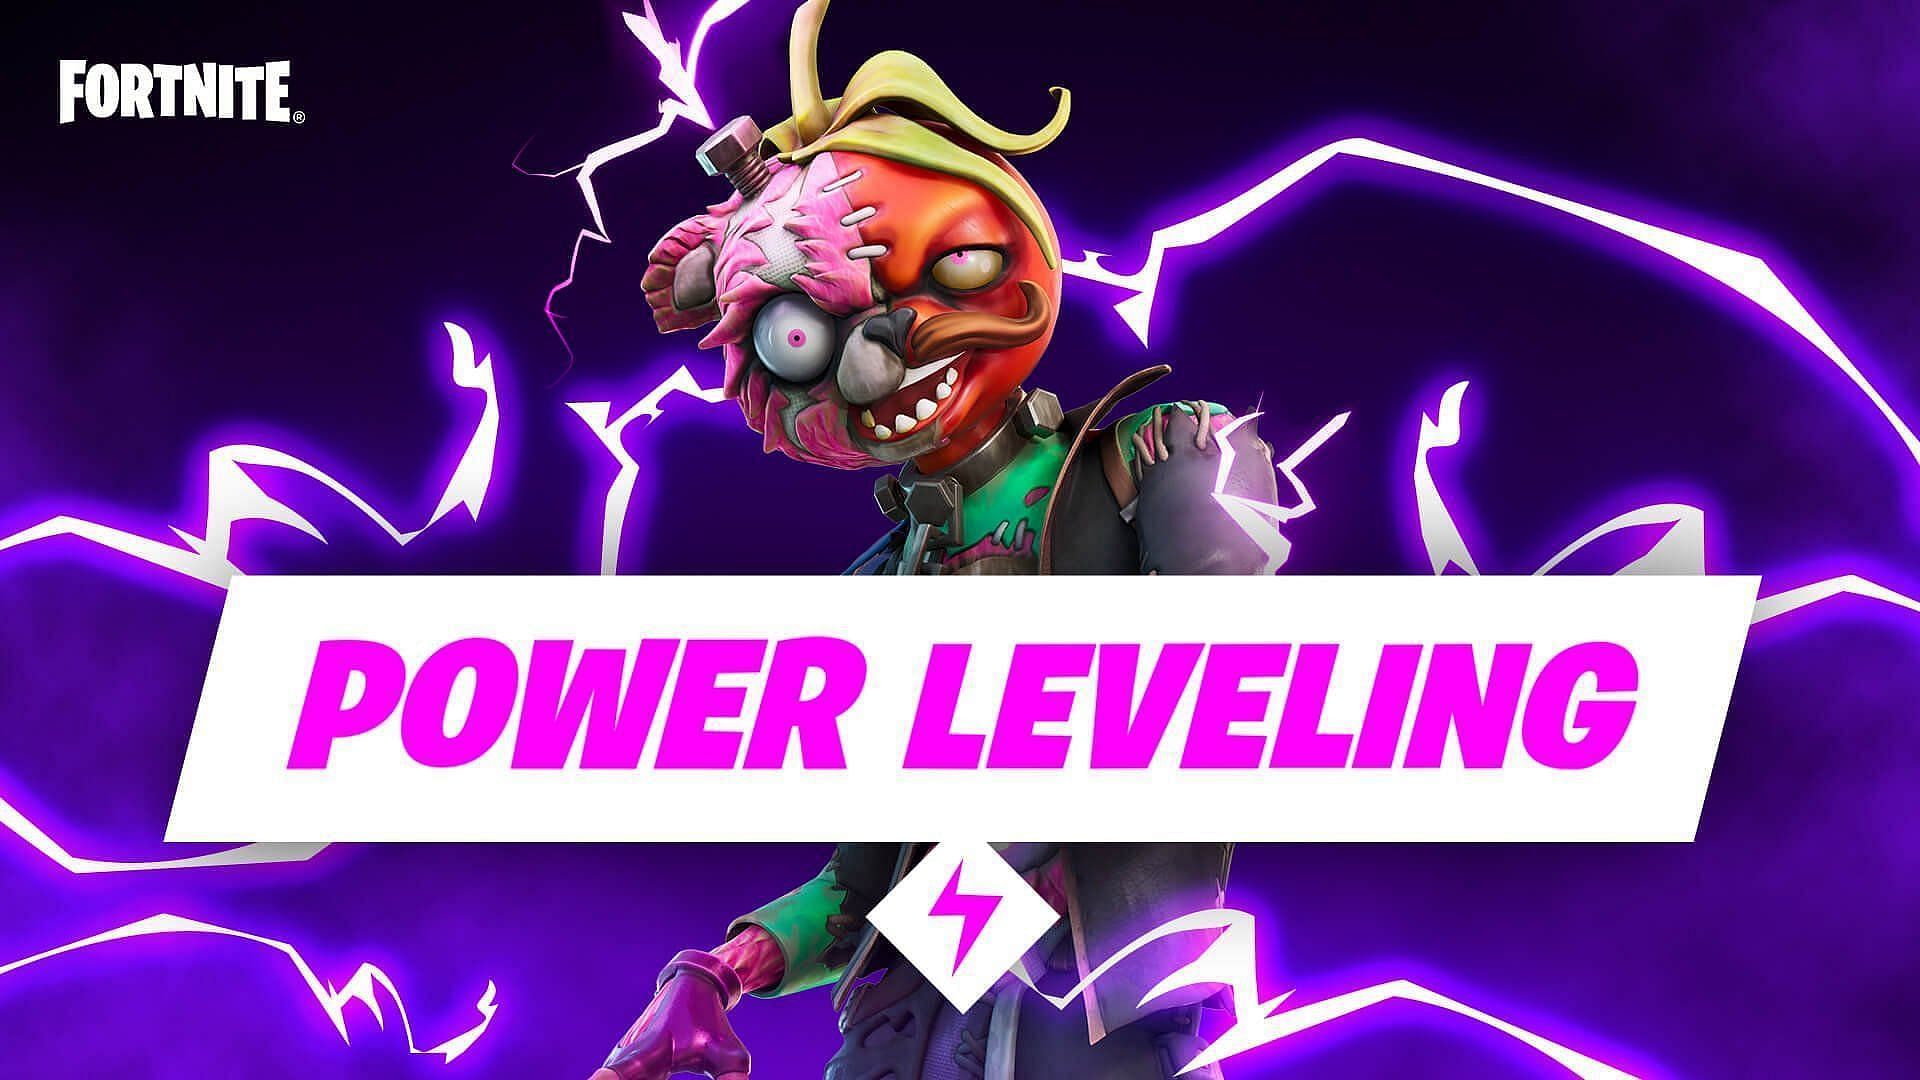 The second week of Power Leveling Weekend is available in Fortnite Chapter 2 Season 8 (Image via UntameableLuna/Twitter)